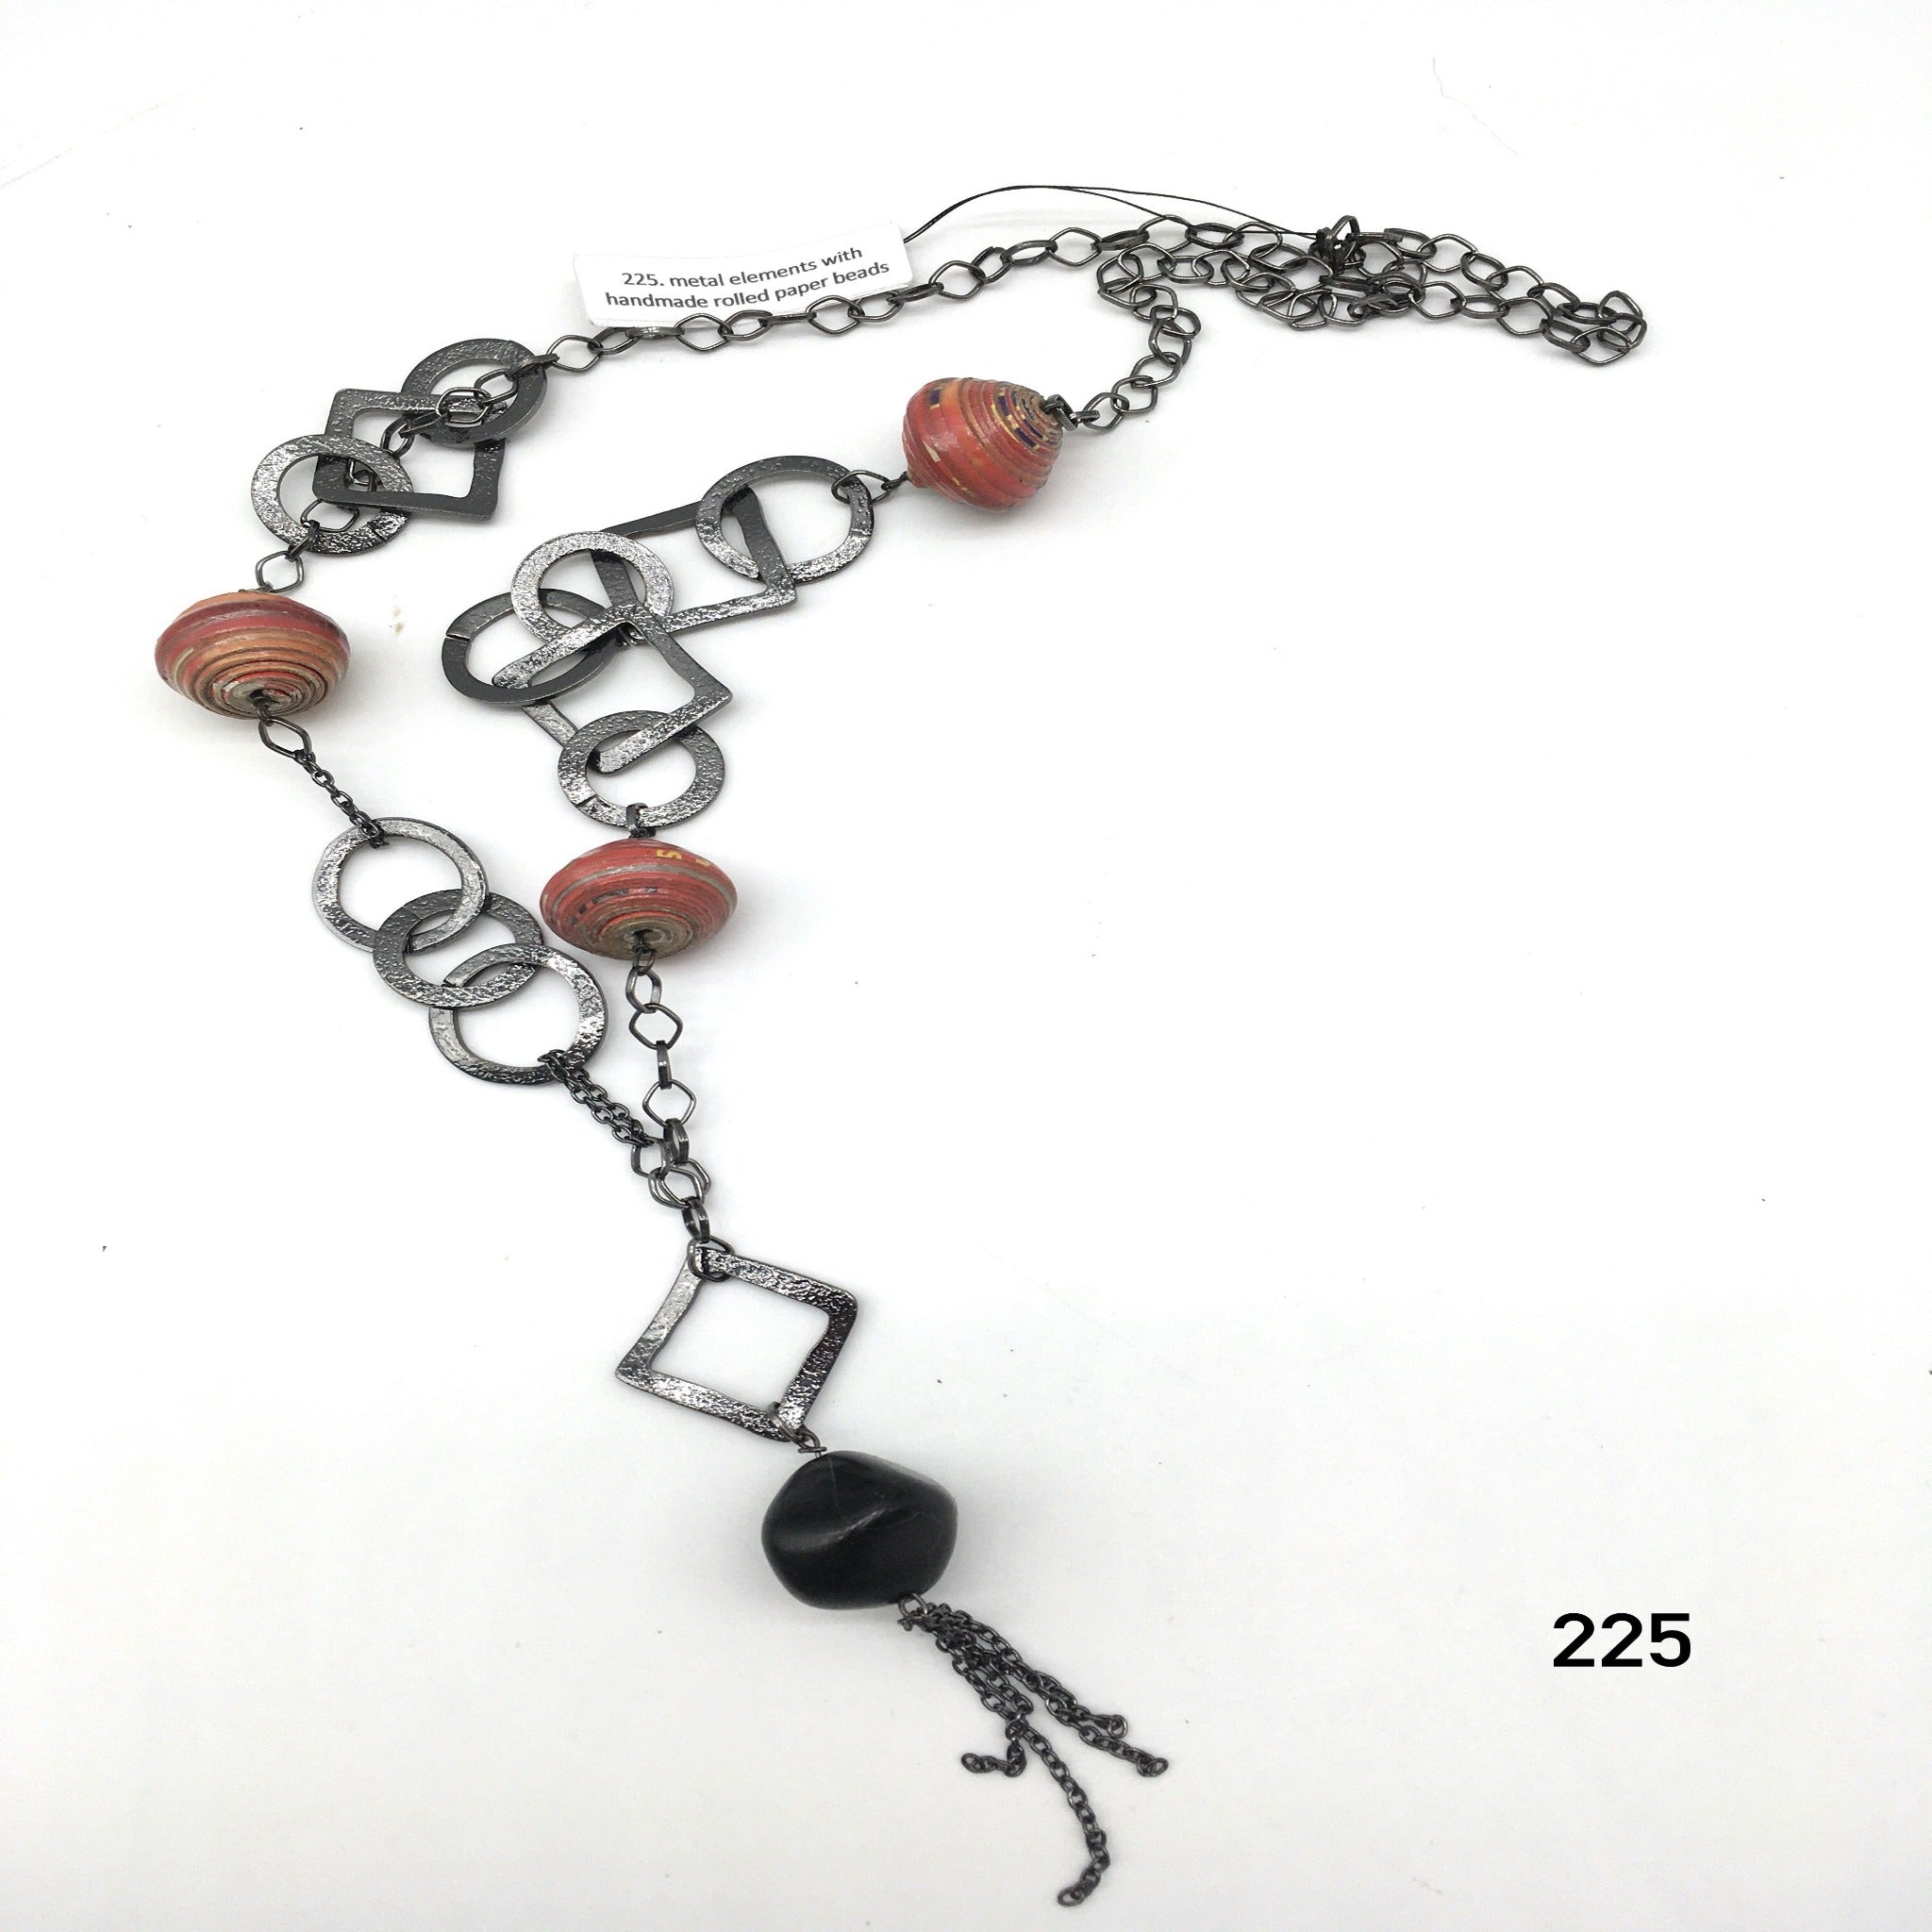 Metal elements with handmade rolled paper beads necklace created by central NJ artist Dorothea Drew Design